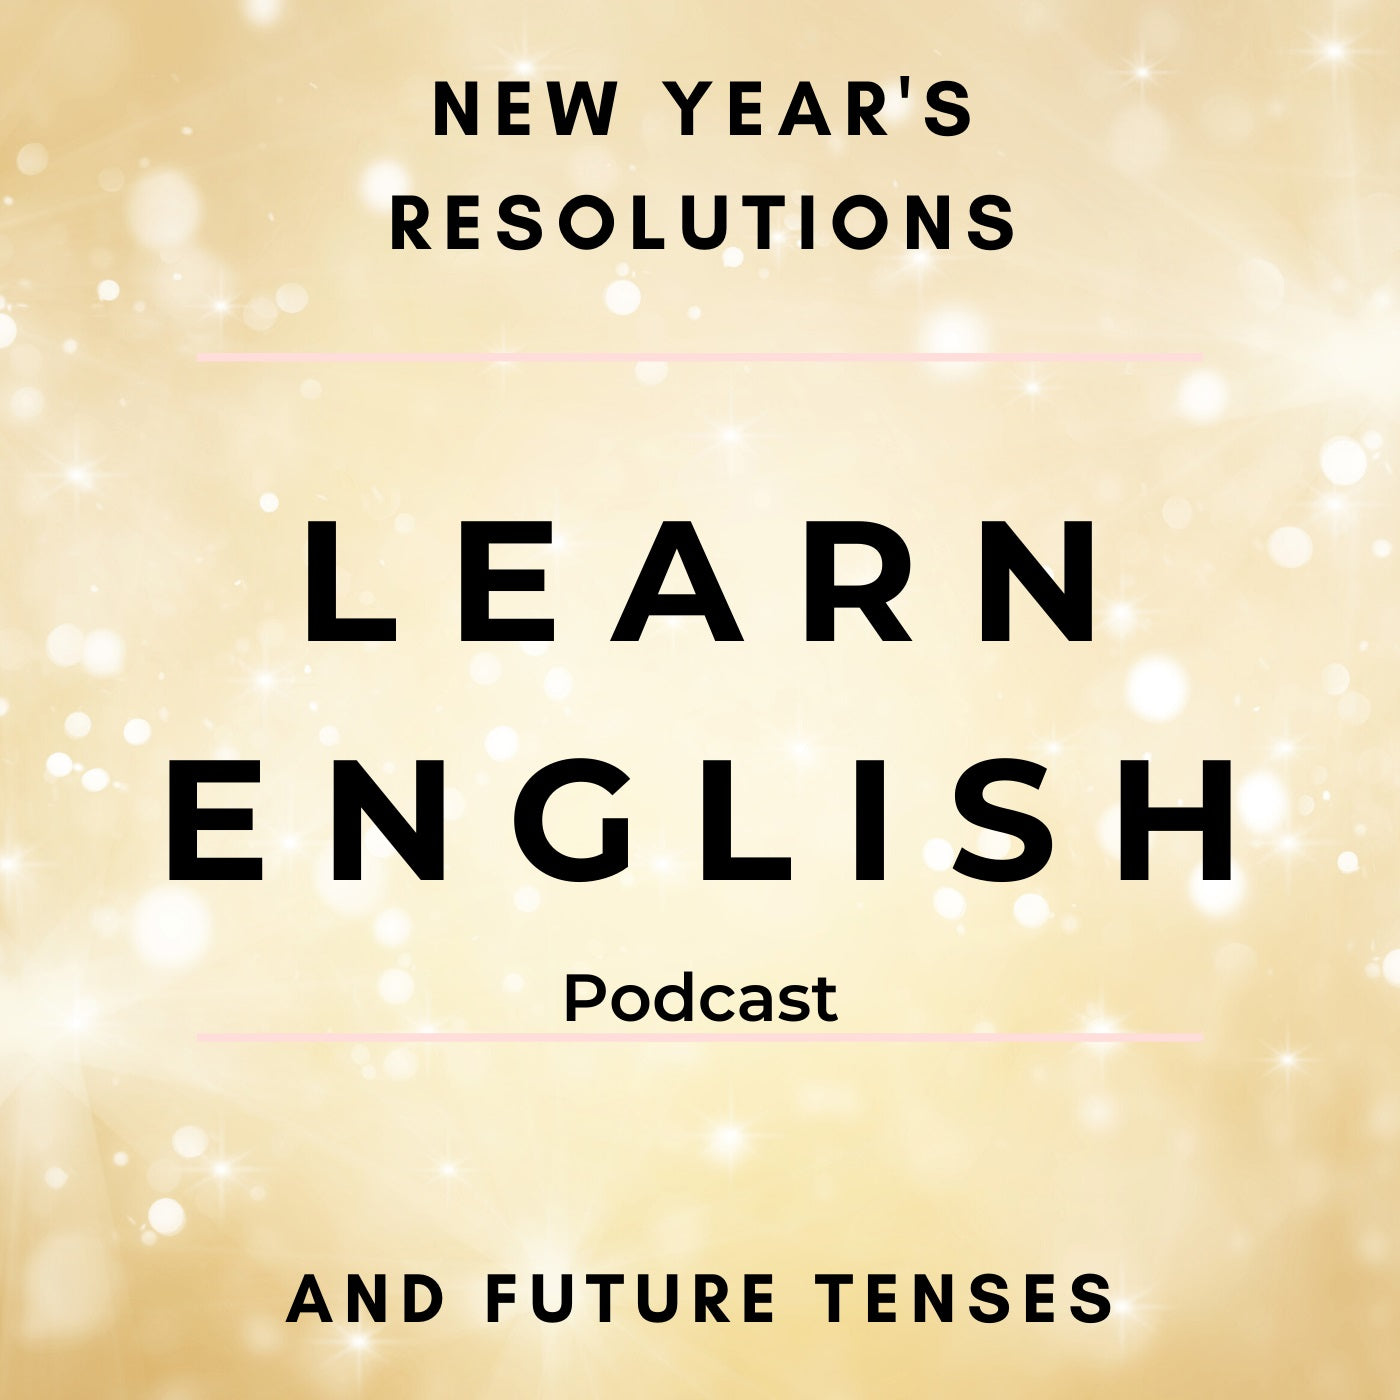 Learn English Podcast: New Year's Resolutions and Future Tenses (Minea Season 1, Episode 4)